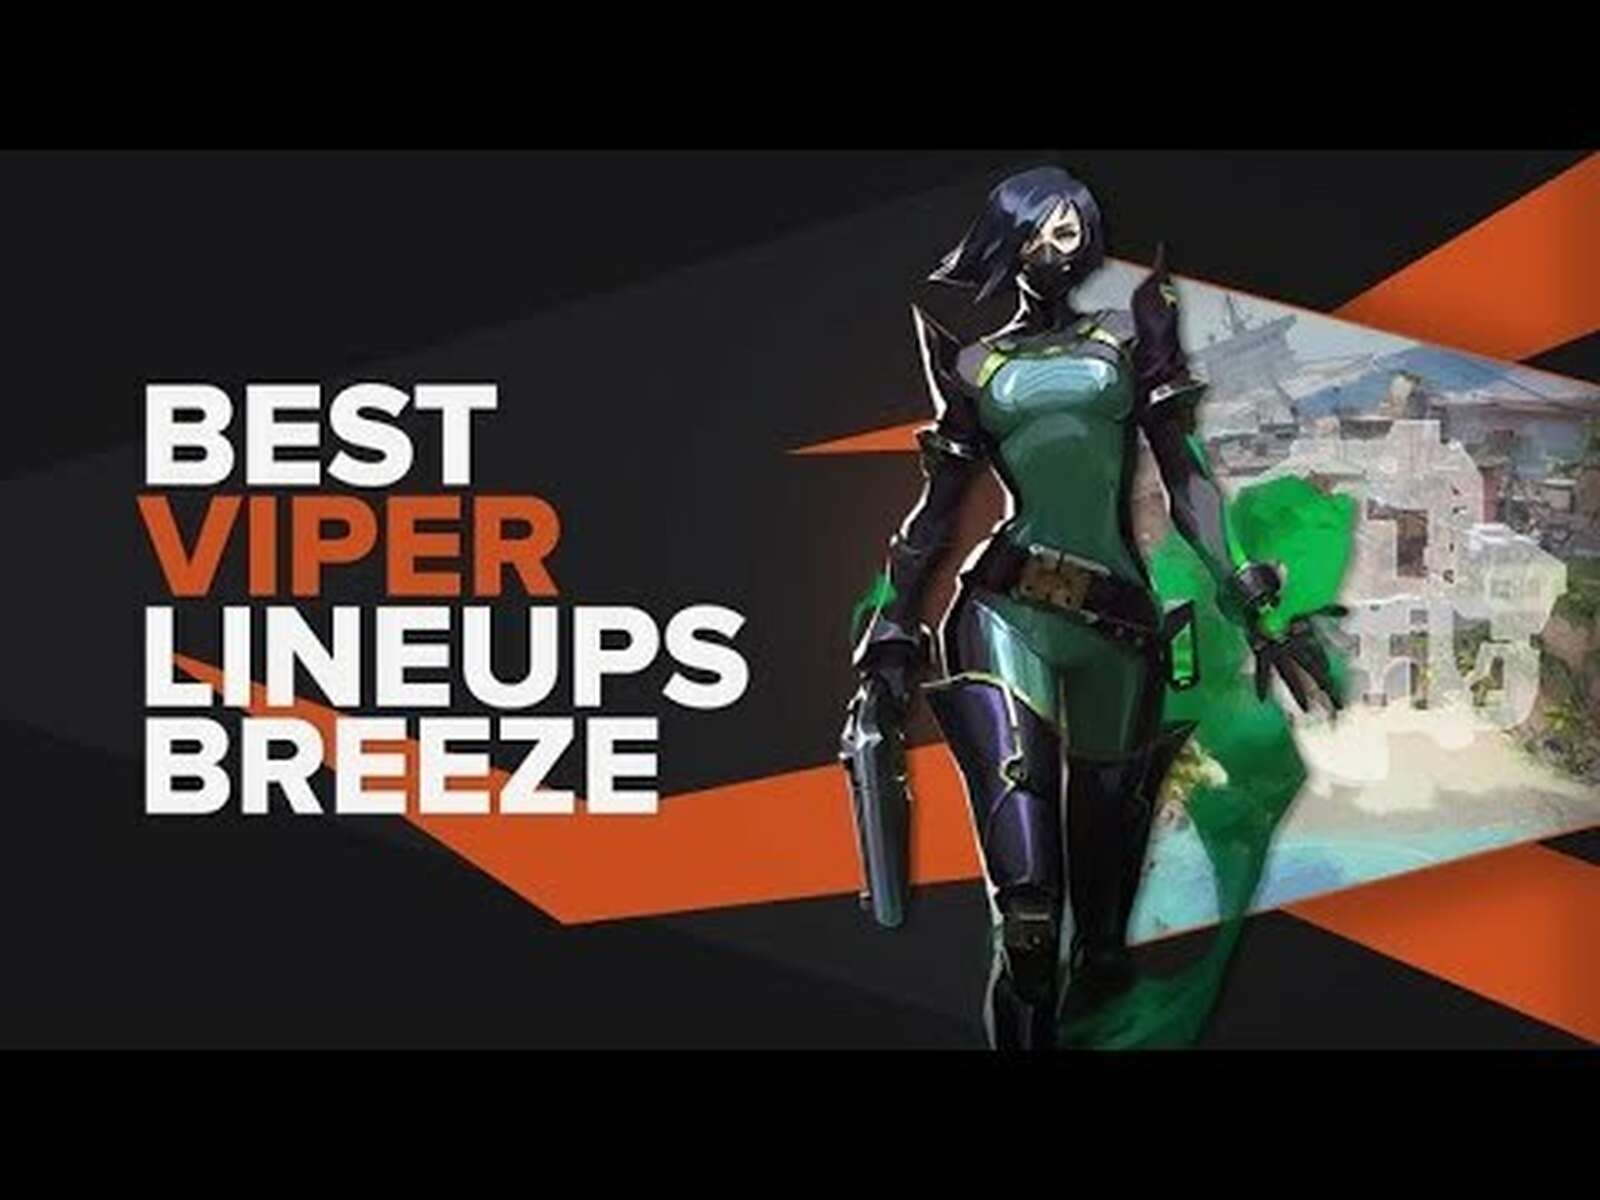 The Best Viper Lineups on Breeze